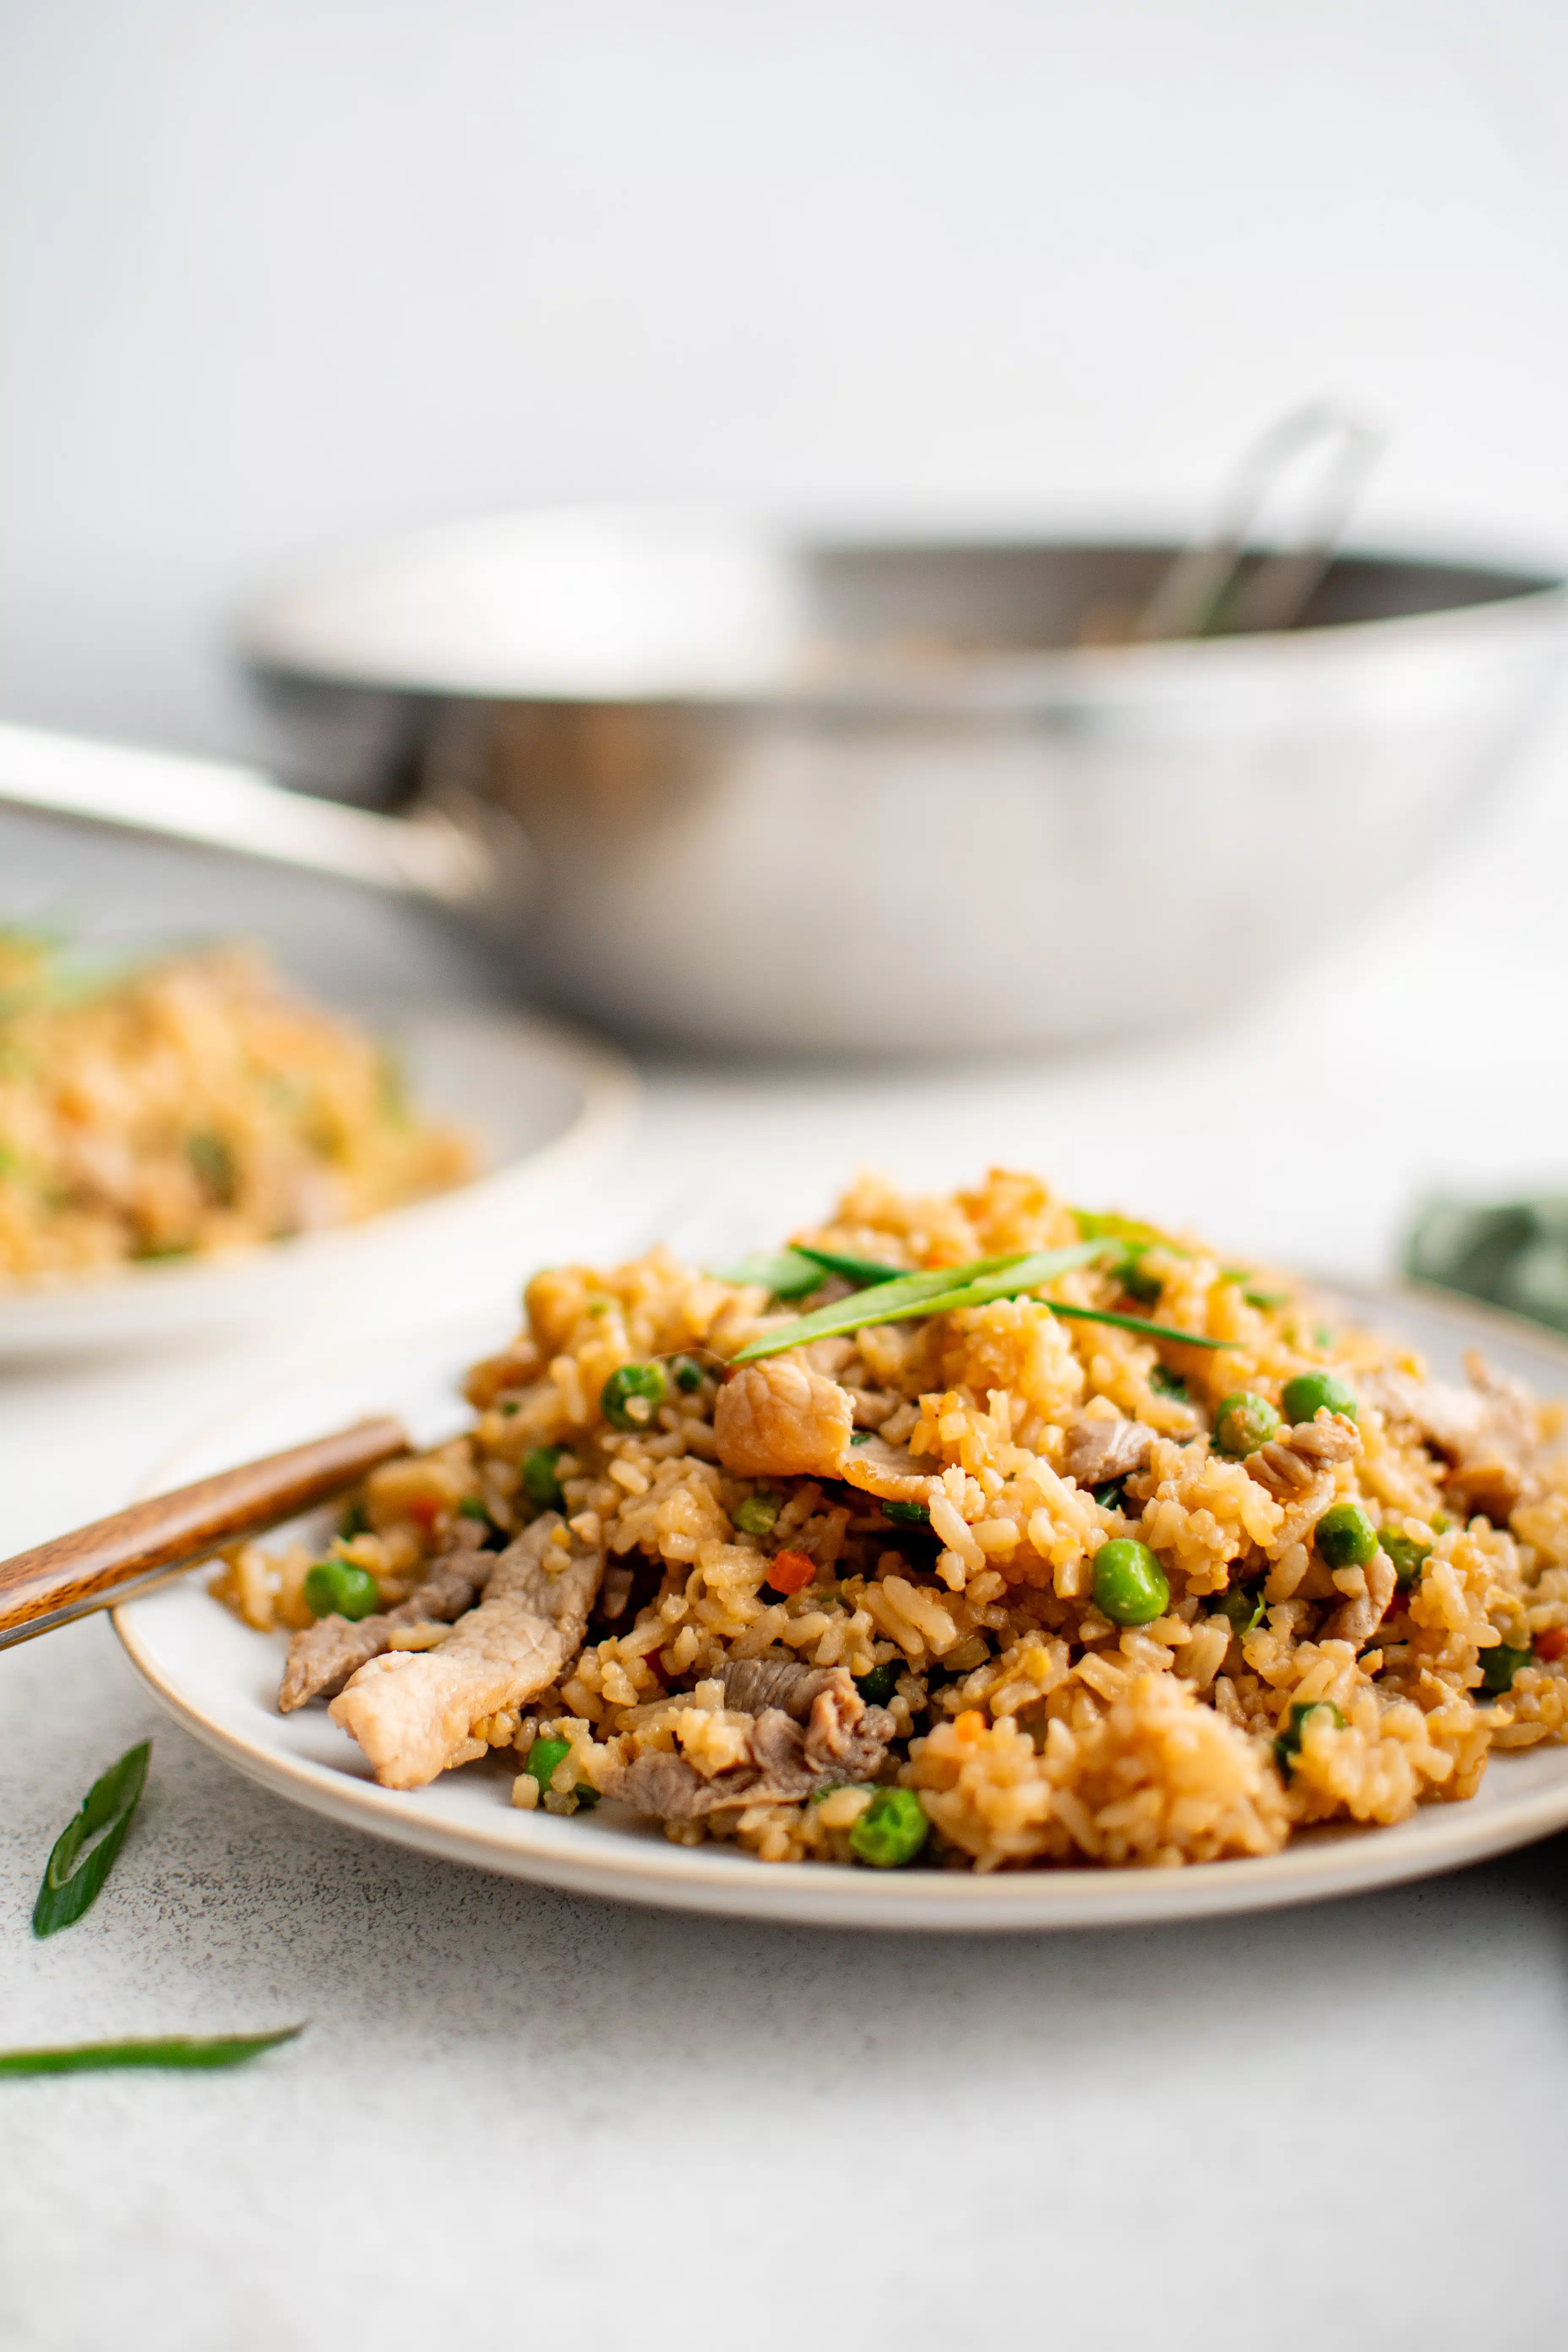 White serving plate with golden brown cooked pork fried rice garnished with green onion with a large stainless steel wok in the background.